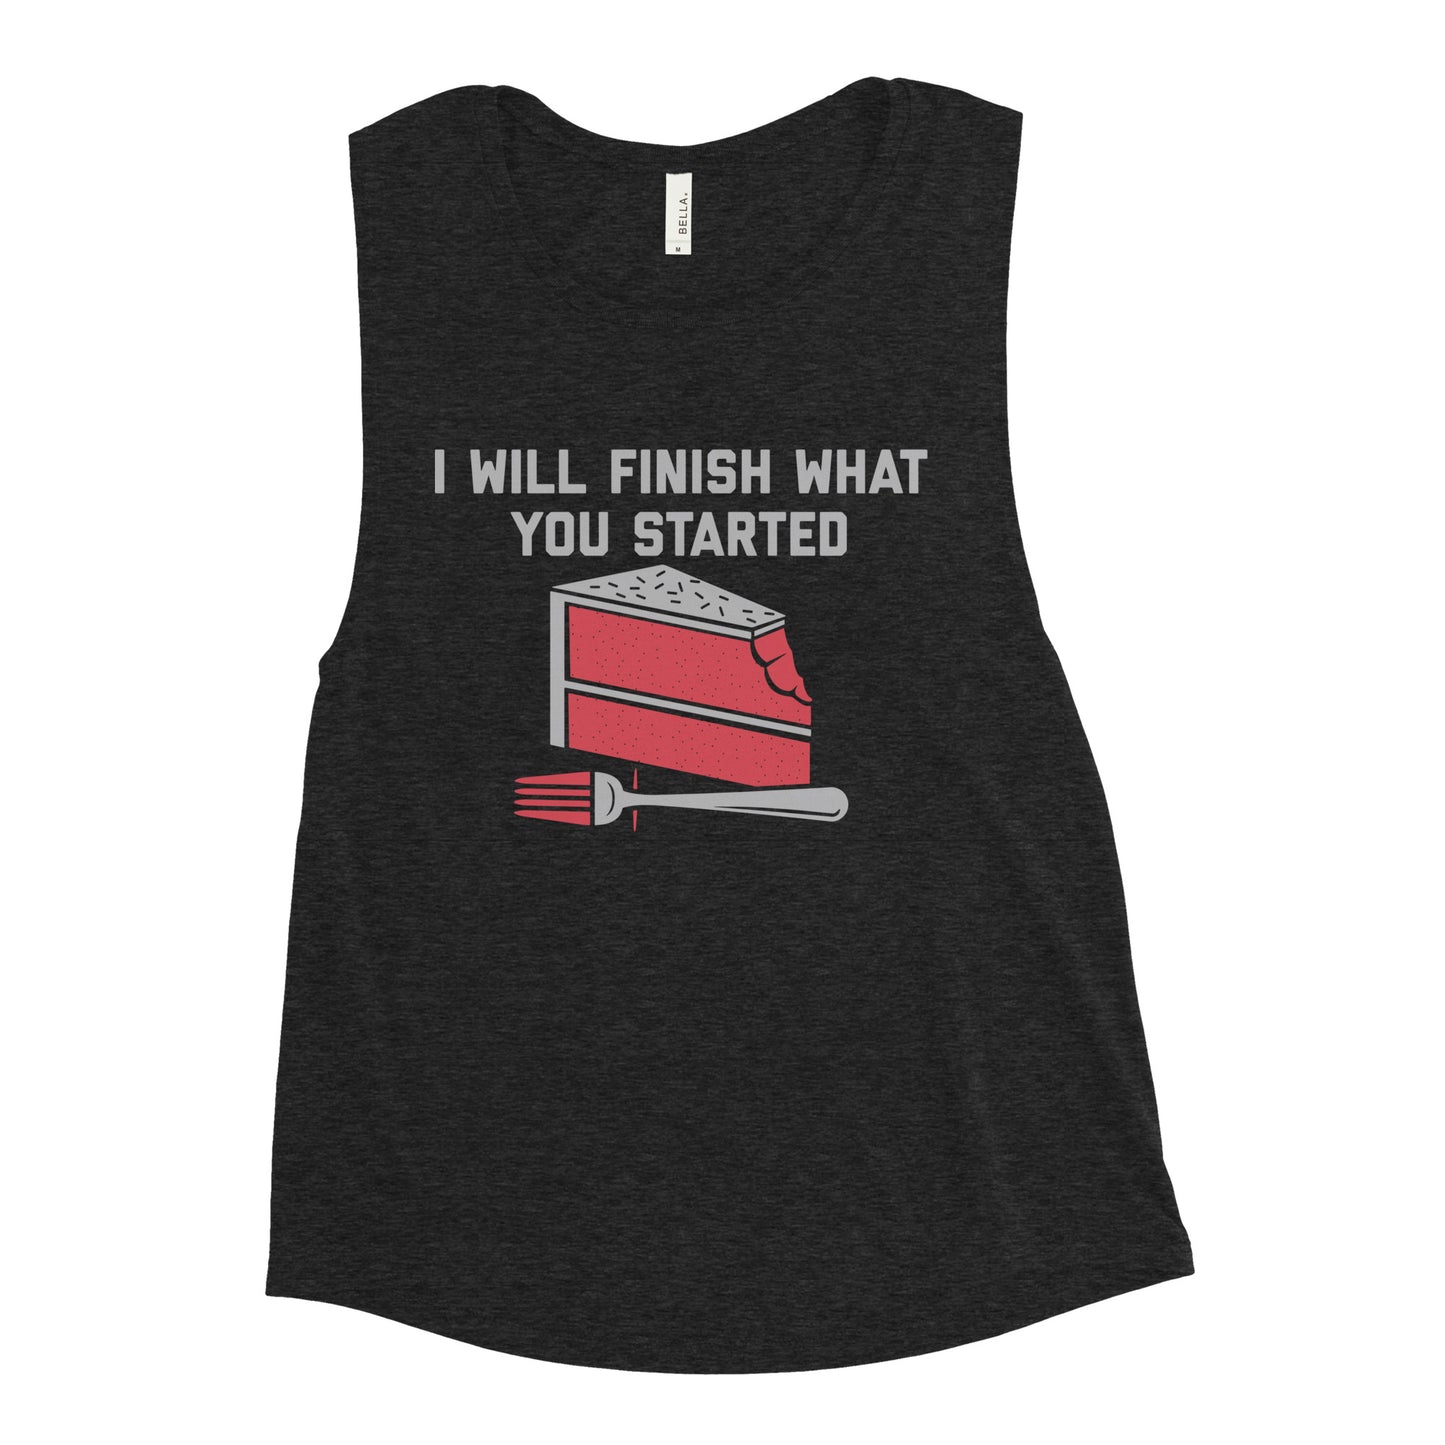 I Will Finish What You Started Women's Muscle Tank